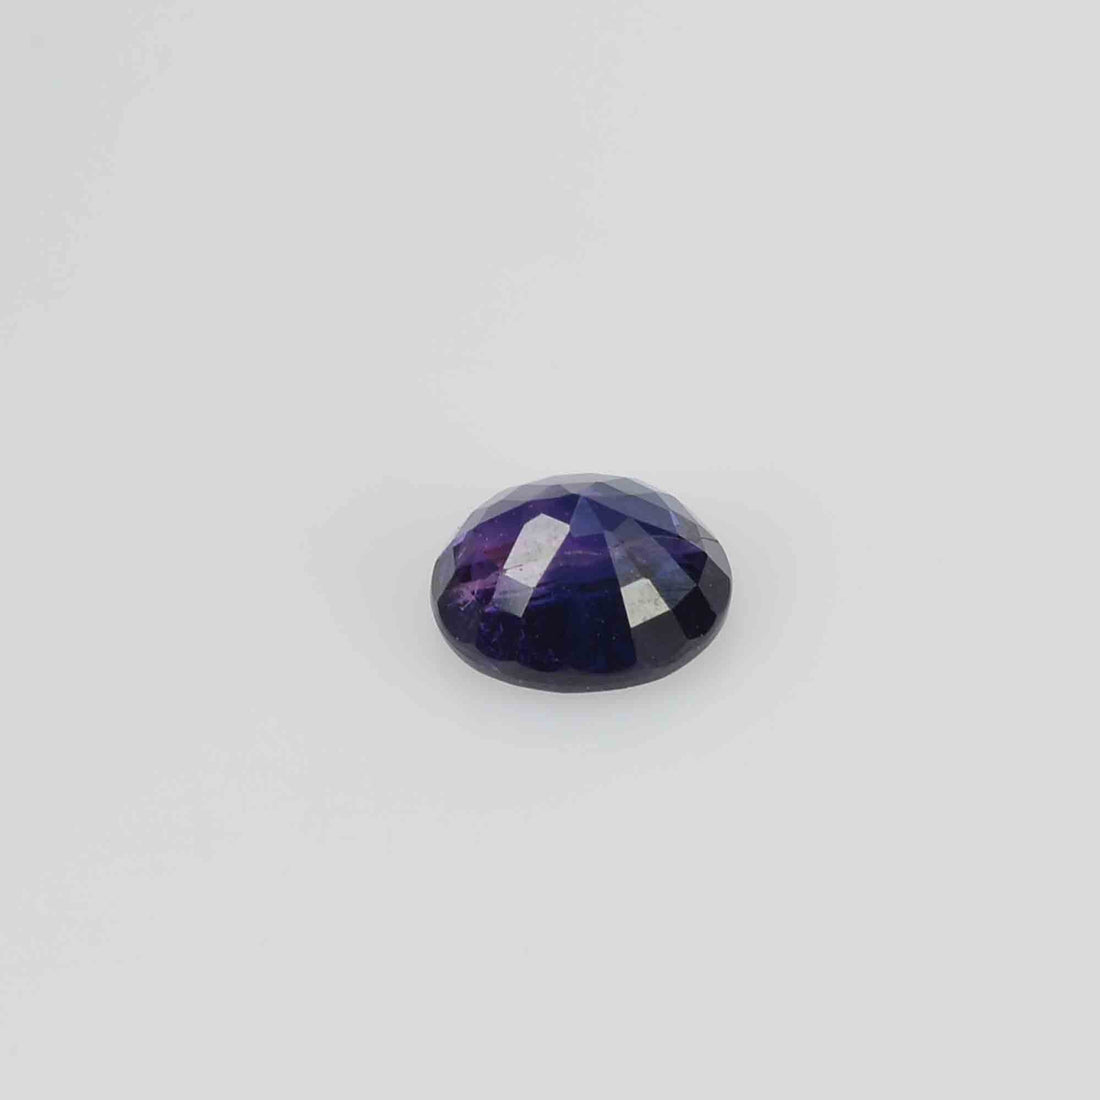 0.97 cts Natural Fancy Bi-Color Sapphire Loose Gemstone oval Cut